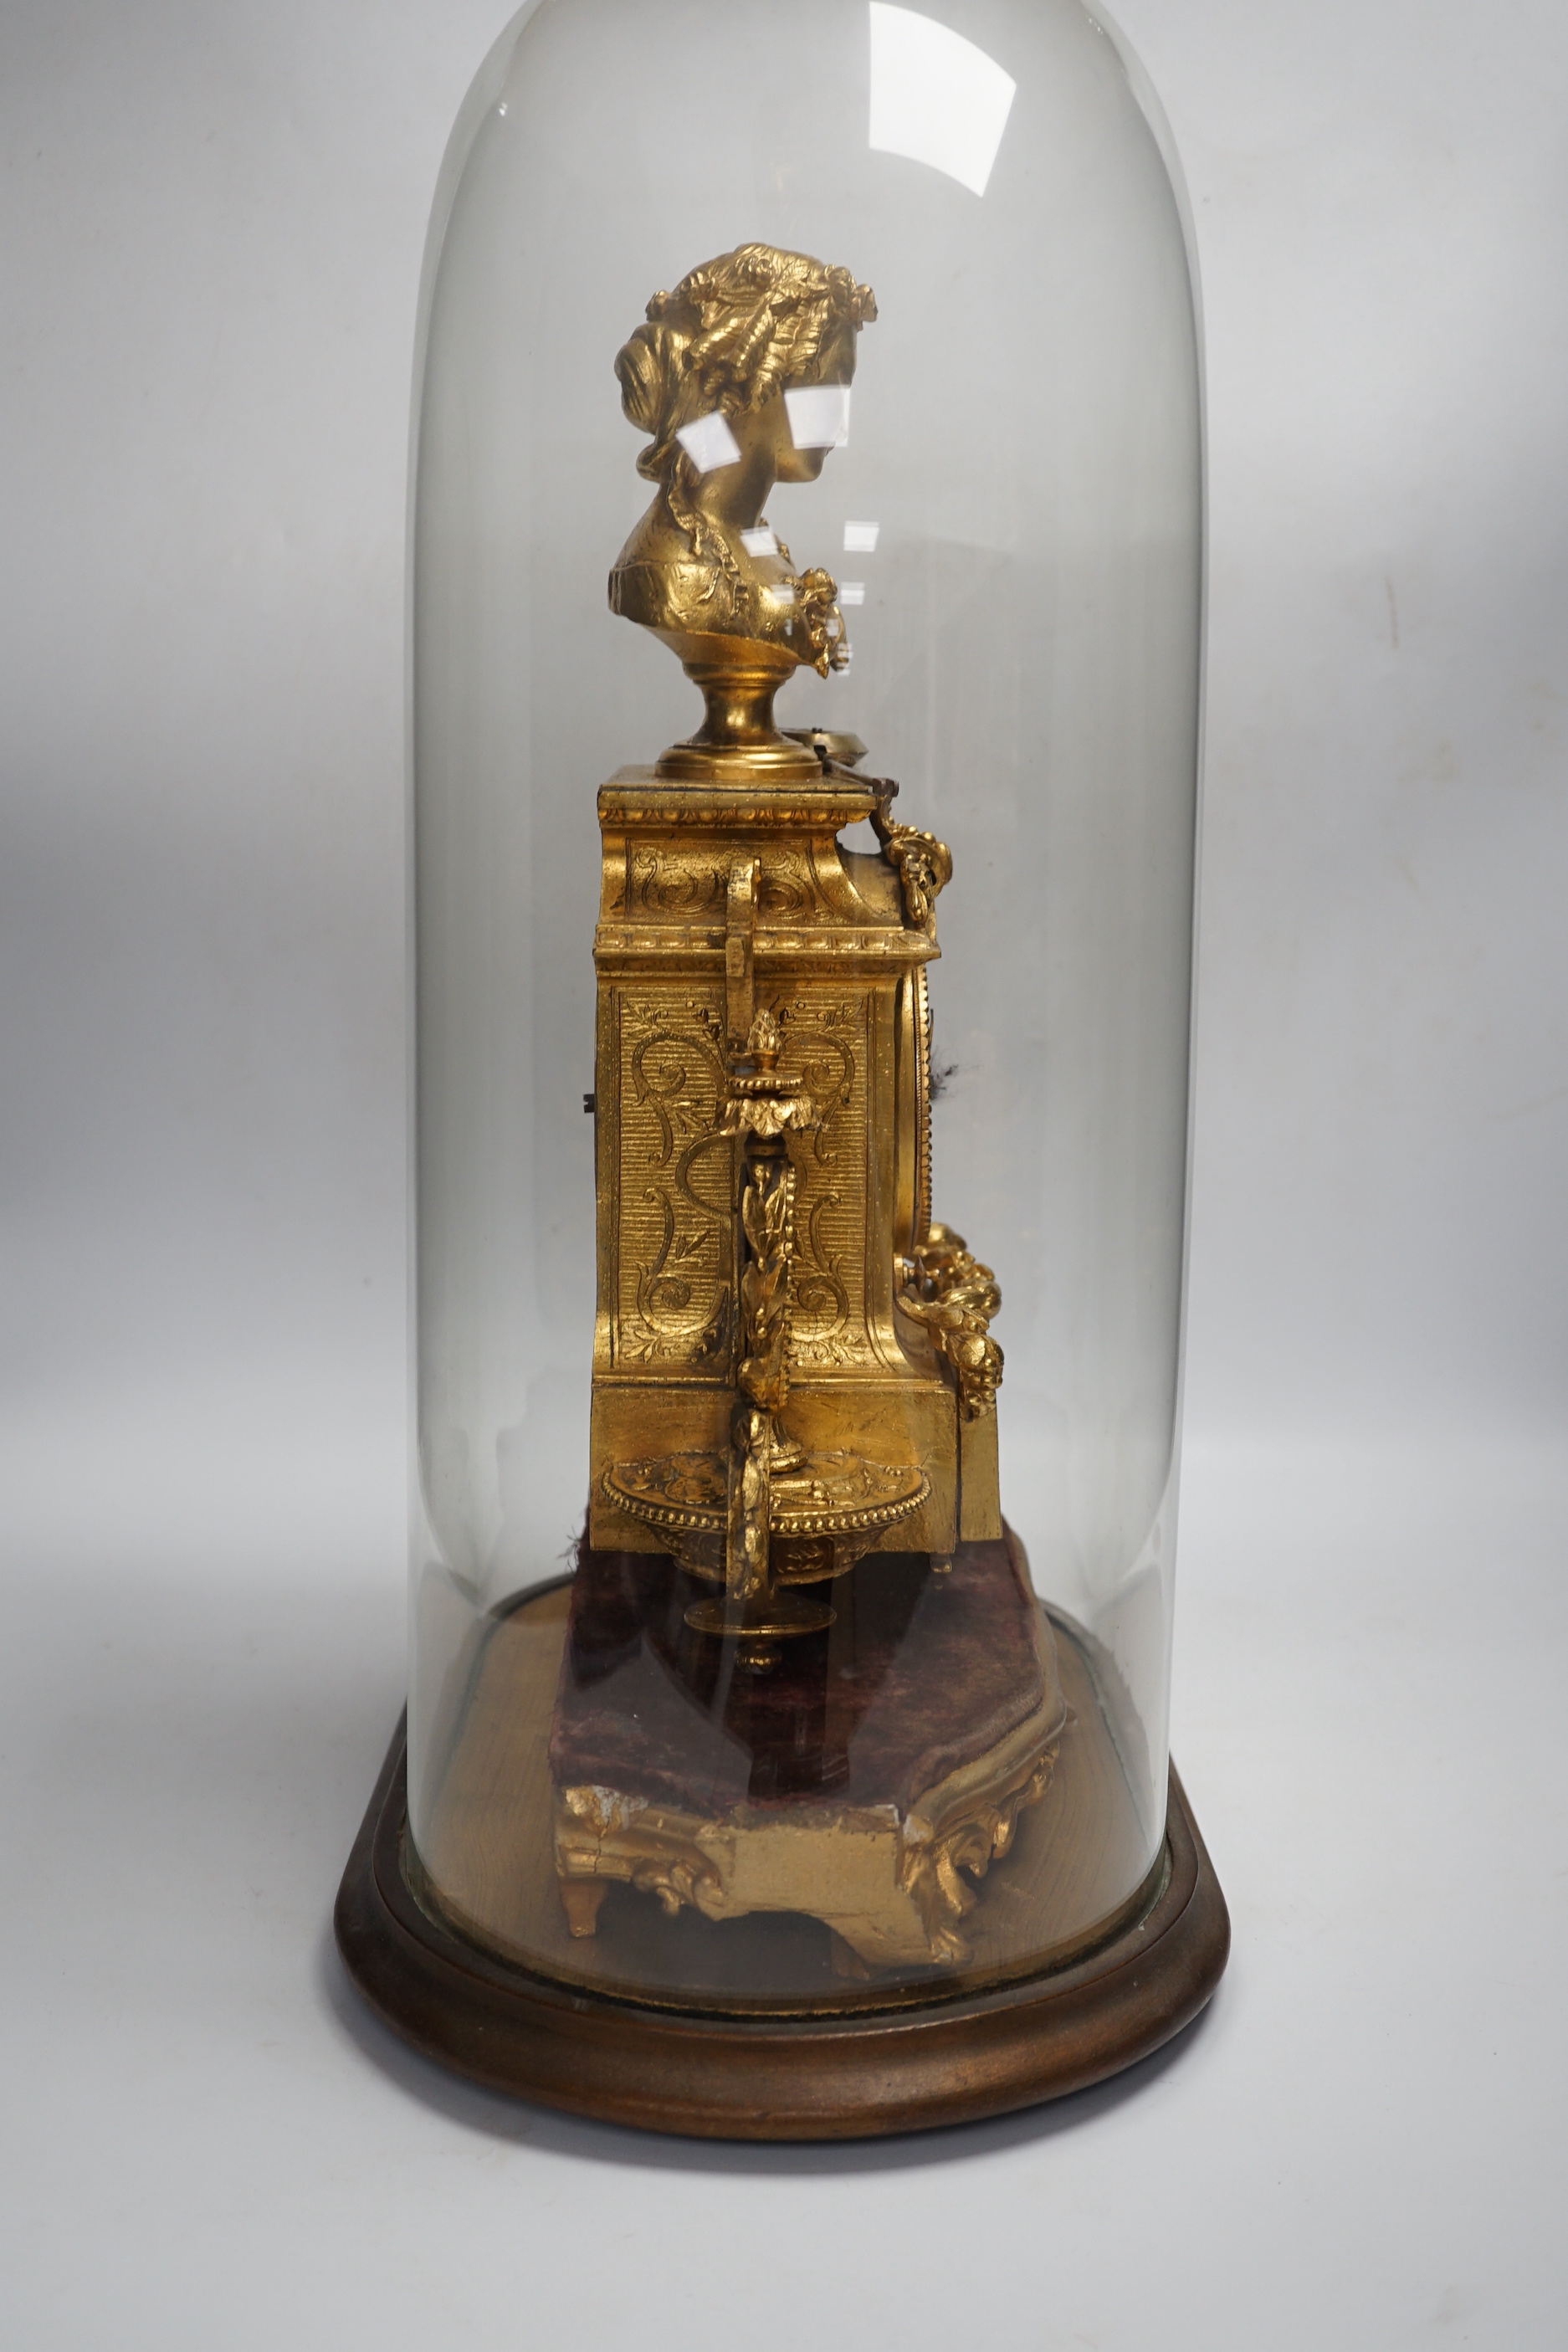 A late 19th century French gilt-spelter mantel clock with enamel panels, under glass dome, 54cm